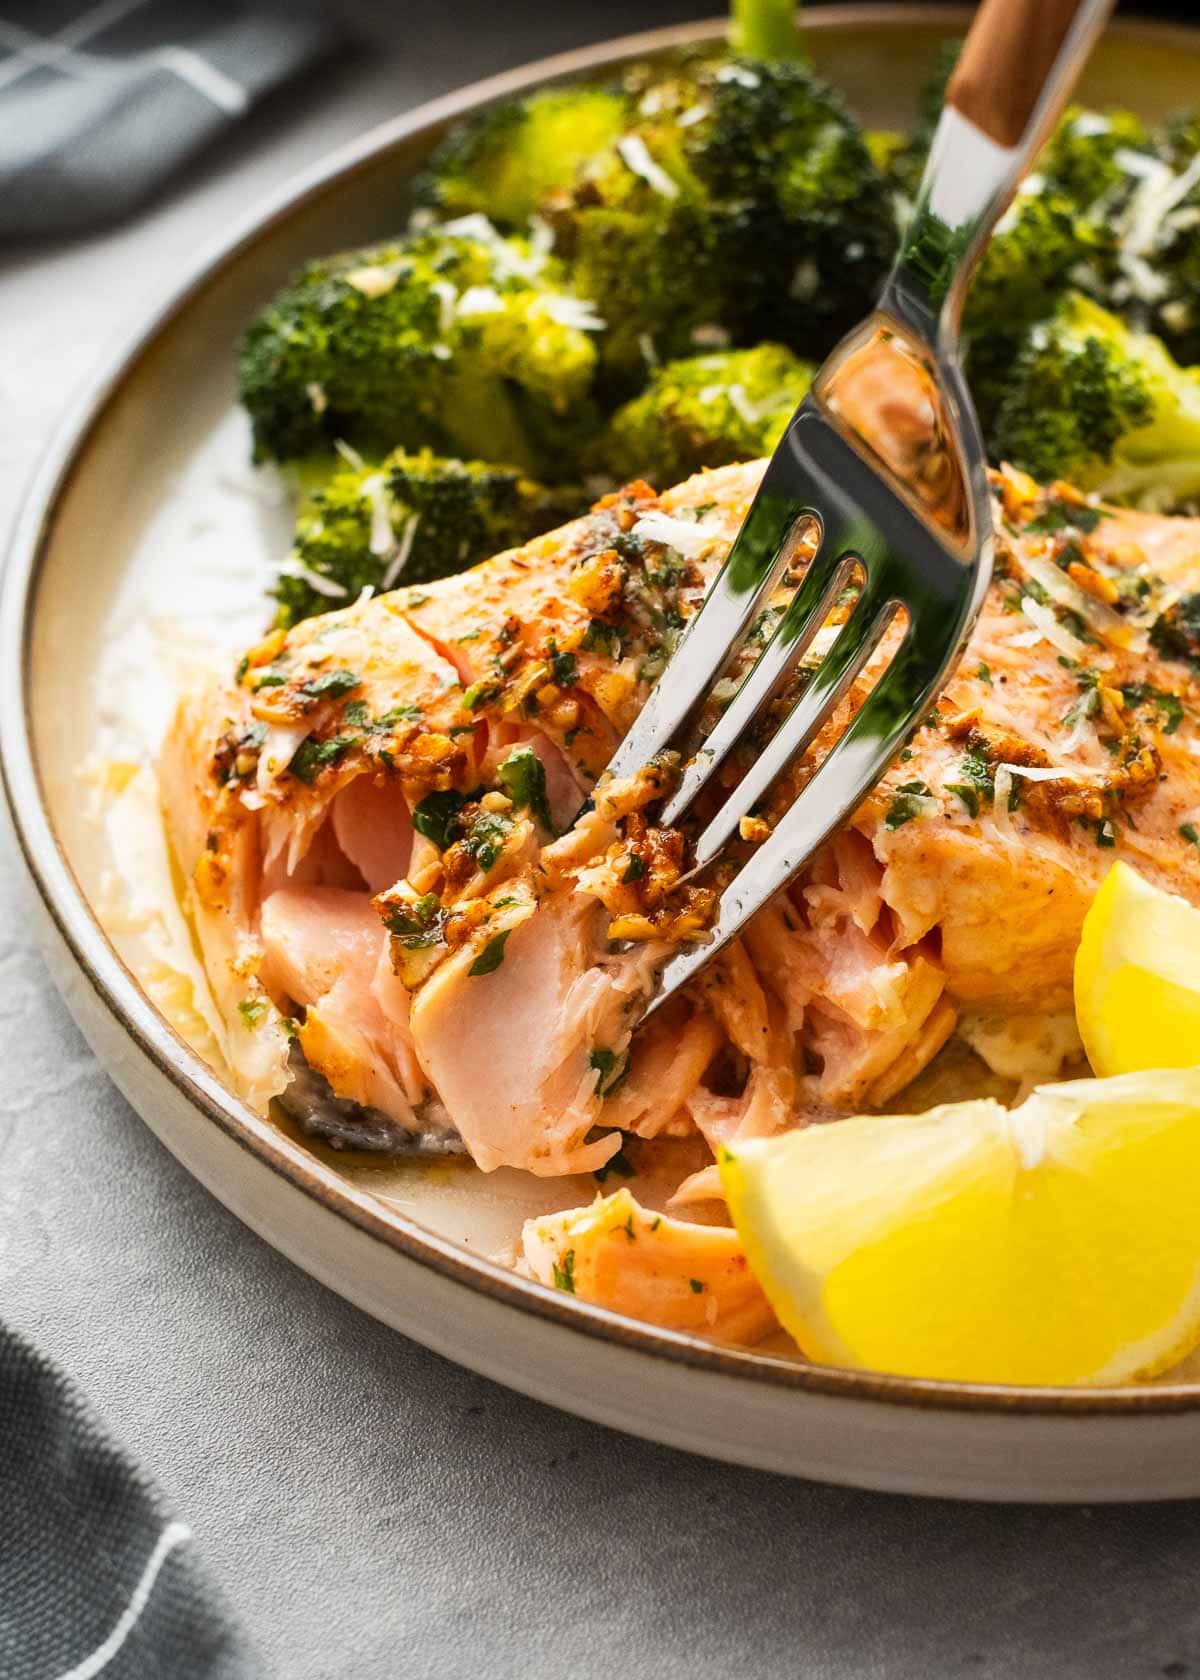 slice of salmon on a fork with salmon and broccol on a plate in the background